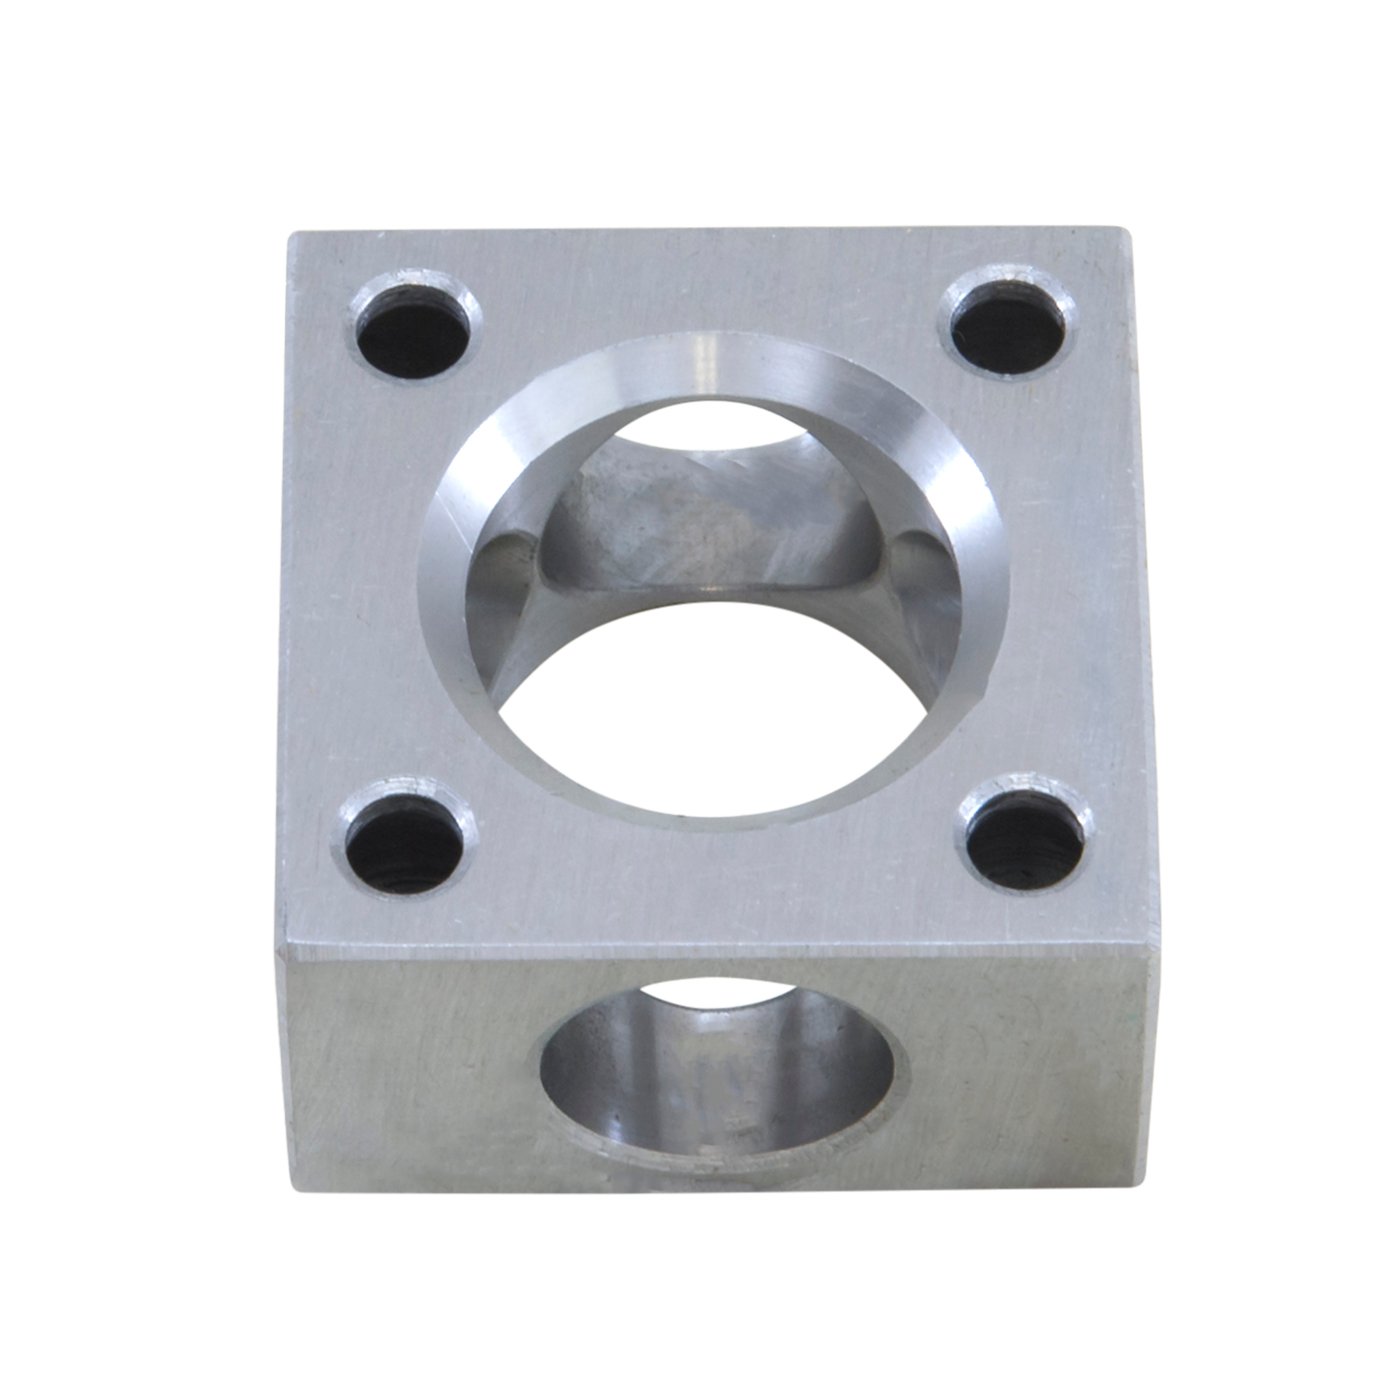 Standard Open And Tracloc Cross Pin Block For 9 in. Ford.